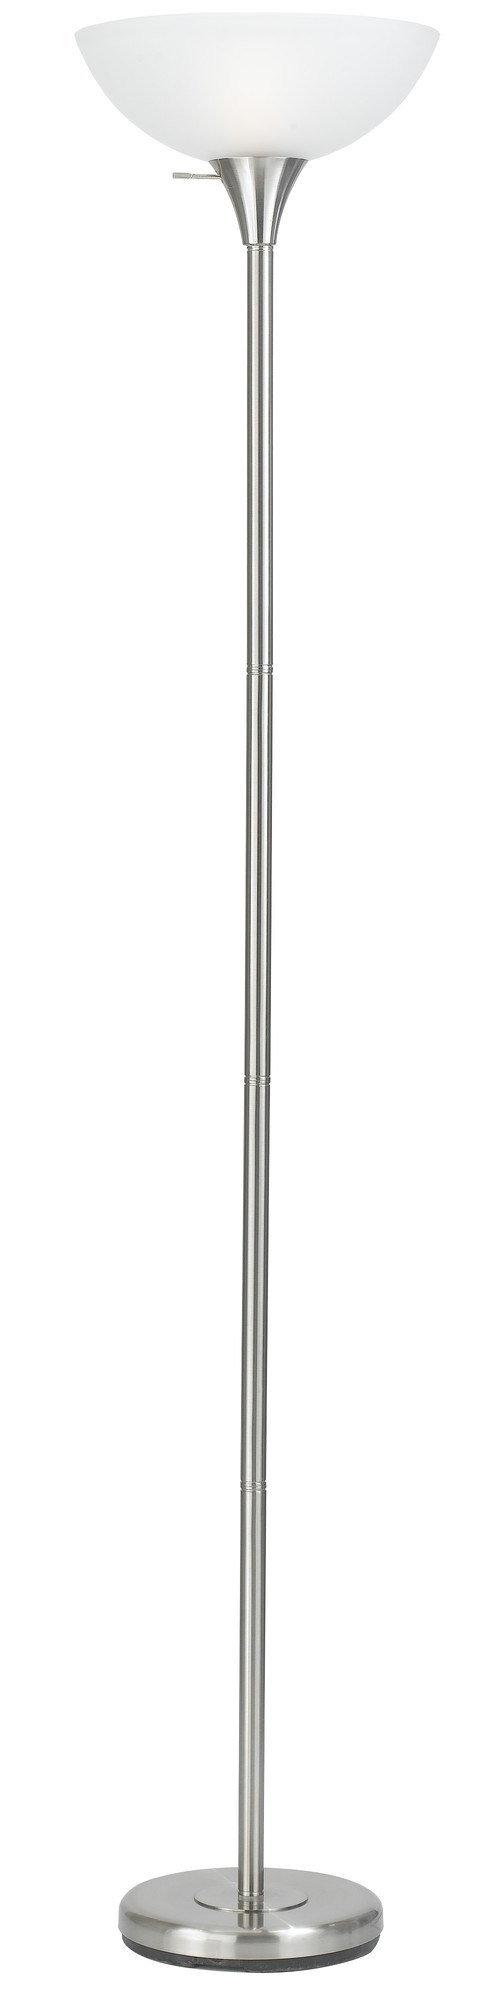 A Collection of Floor Lamps for an Elegant Look (10)